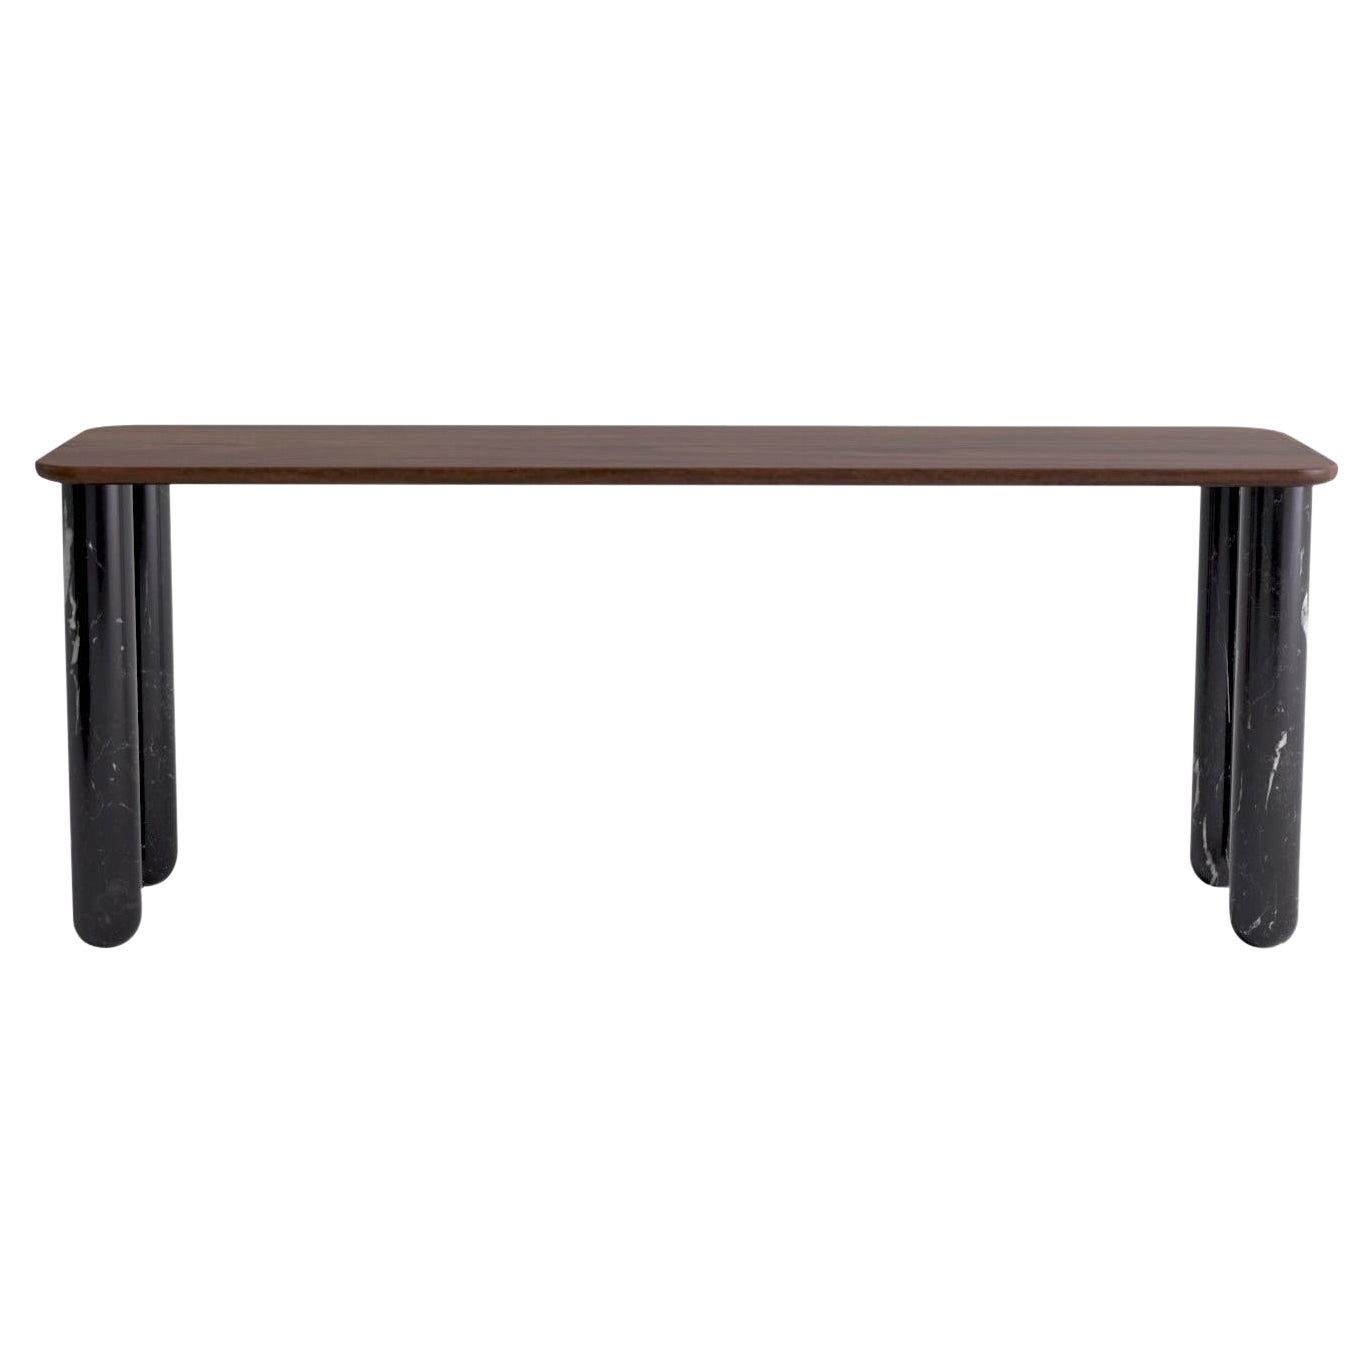 Large Walnut and Black Marble "Sunday" Dining Table, Jean-Baptiste Souletie For Sale